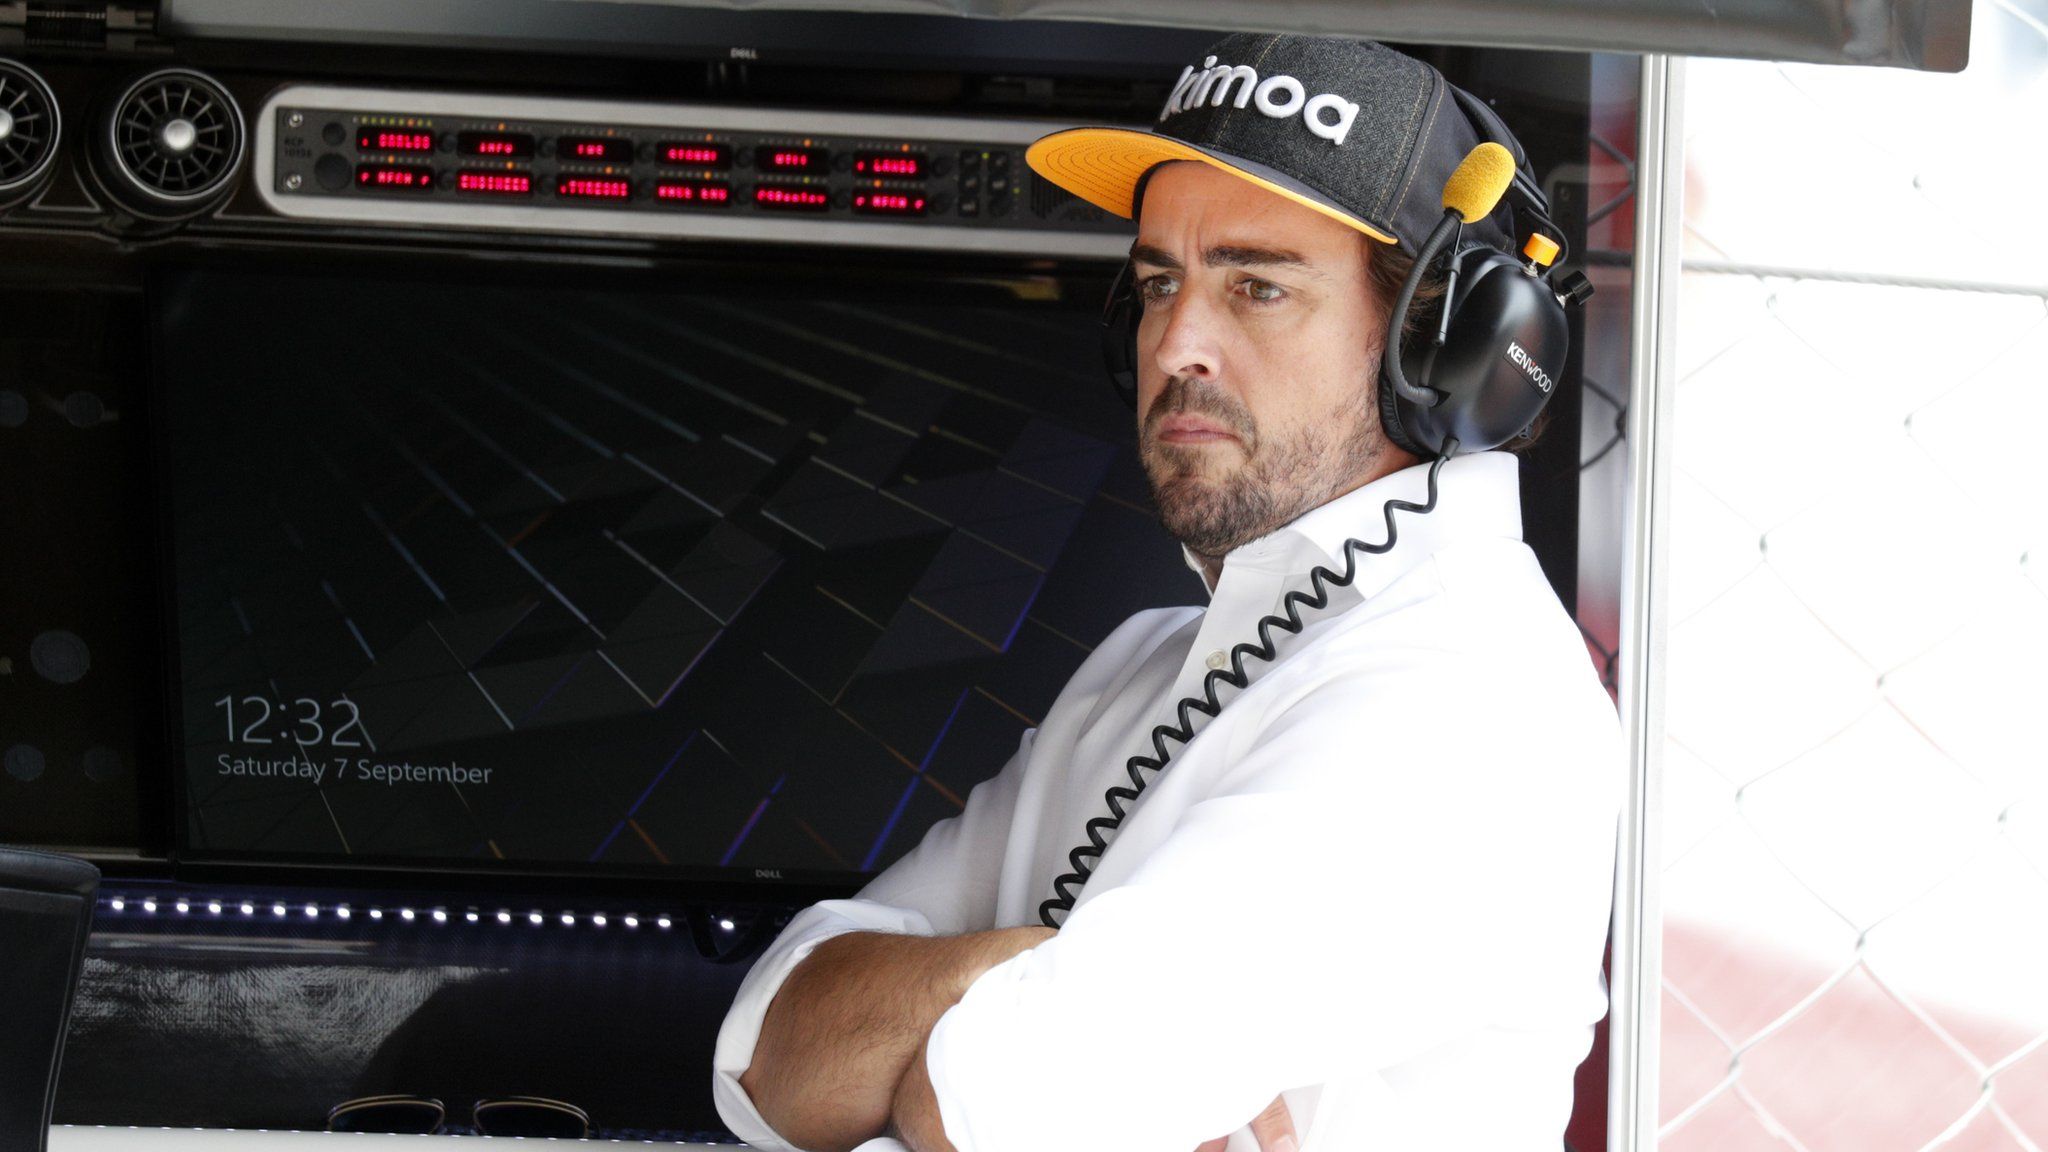 Fernando Alonso at Monza with the McLaren team on Saturday